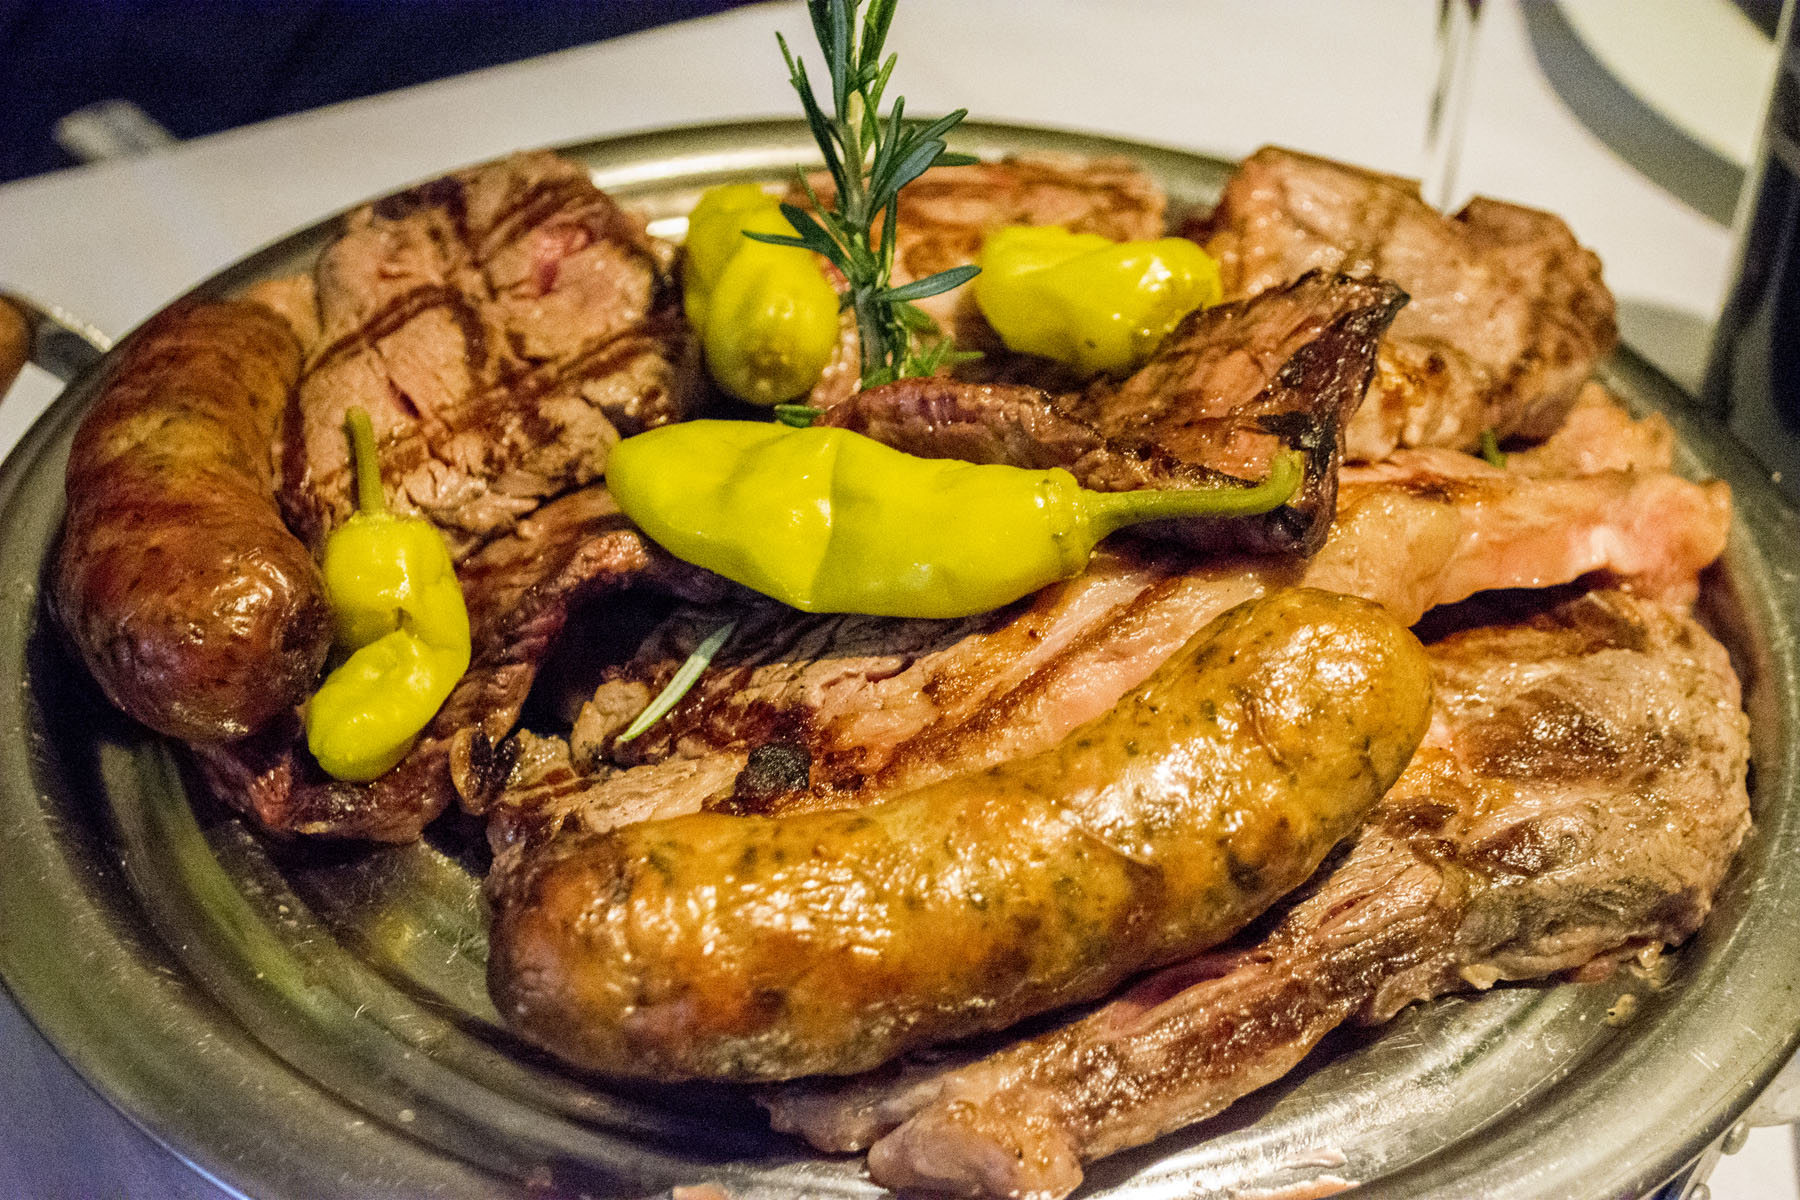   The Parrillada Del Sur for Two ($64) is a mixed grill platter that features medallions of filet mignon, rack of lamb, skirt steak and Argentinian sausage served with salsa criolla and chimichurri sauce.   Long Islander News photos/Connor Beach  